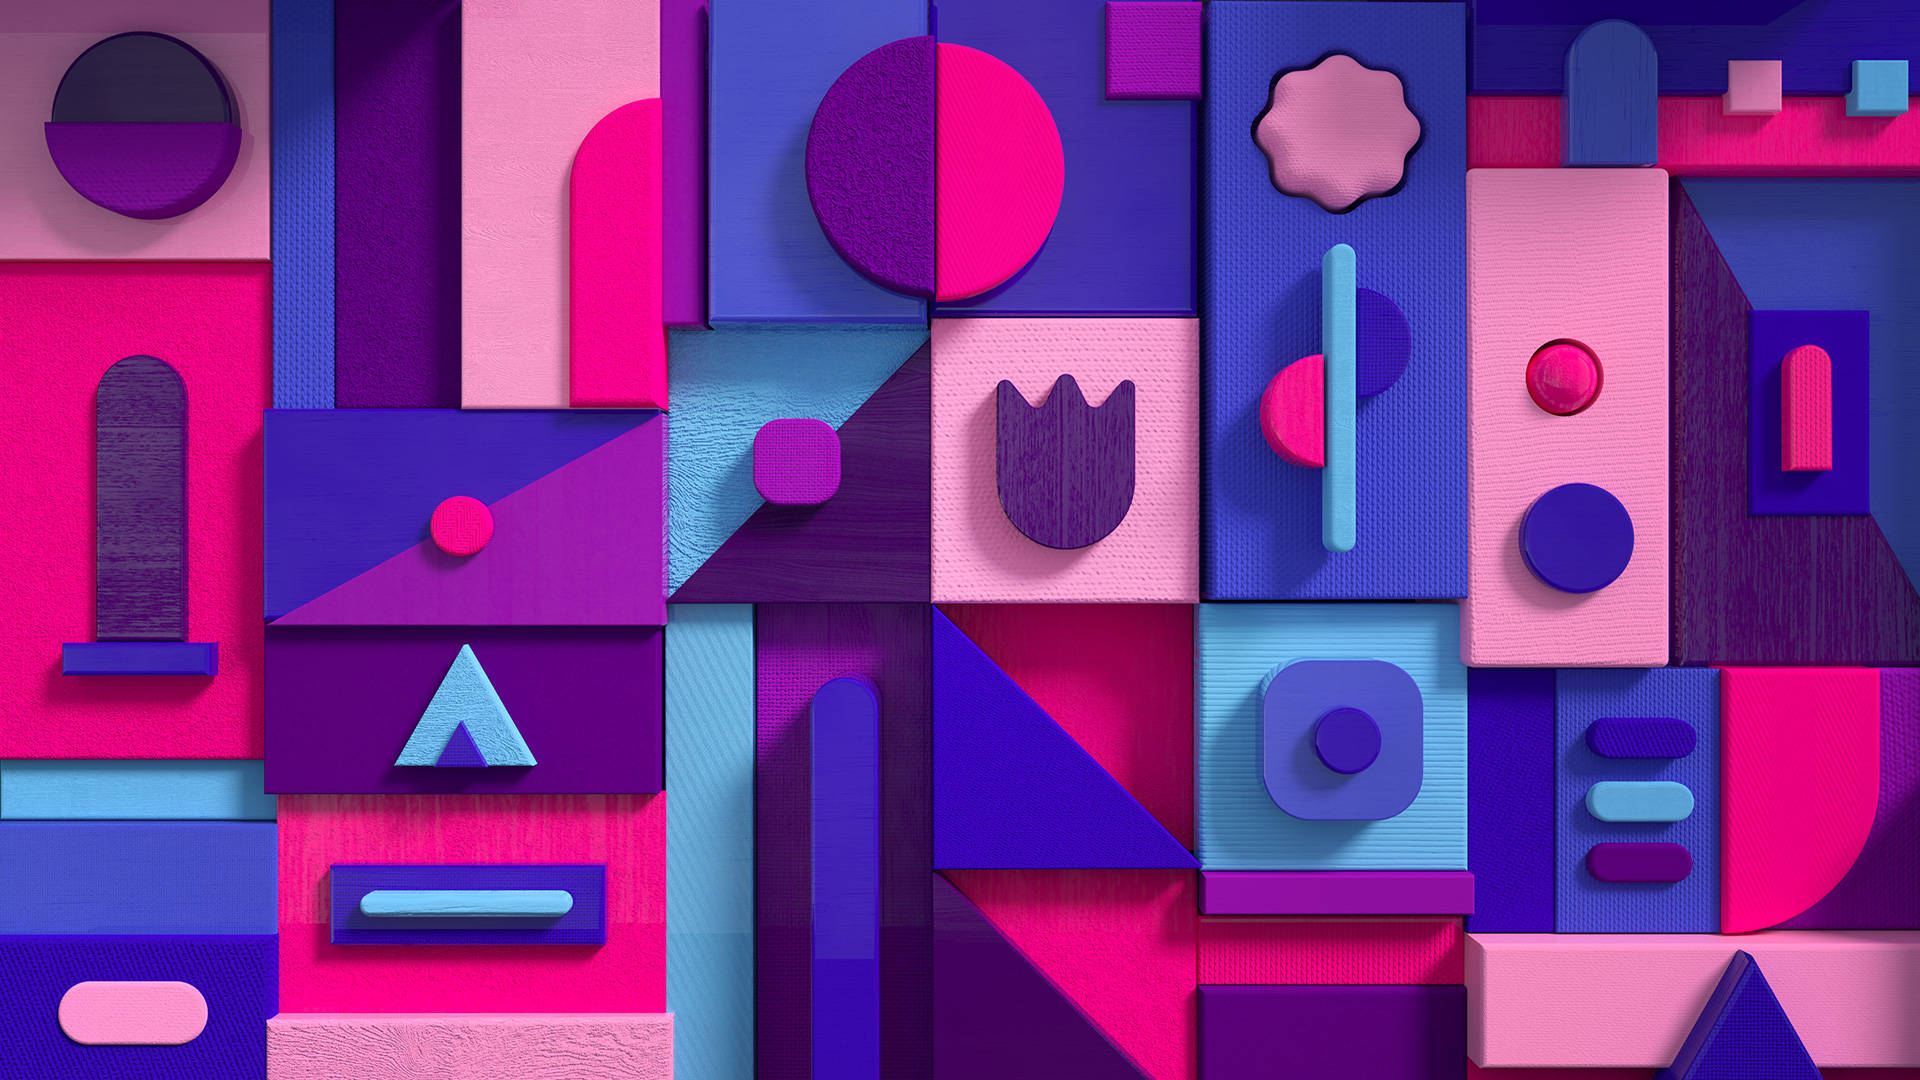 Microsoft Teams Pastel And Shapes Picture